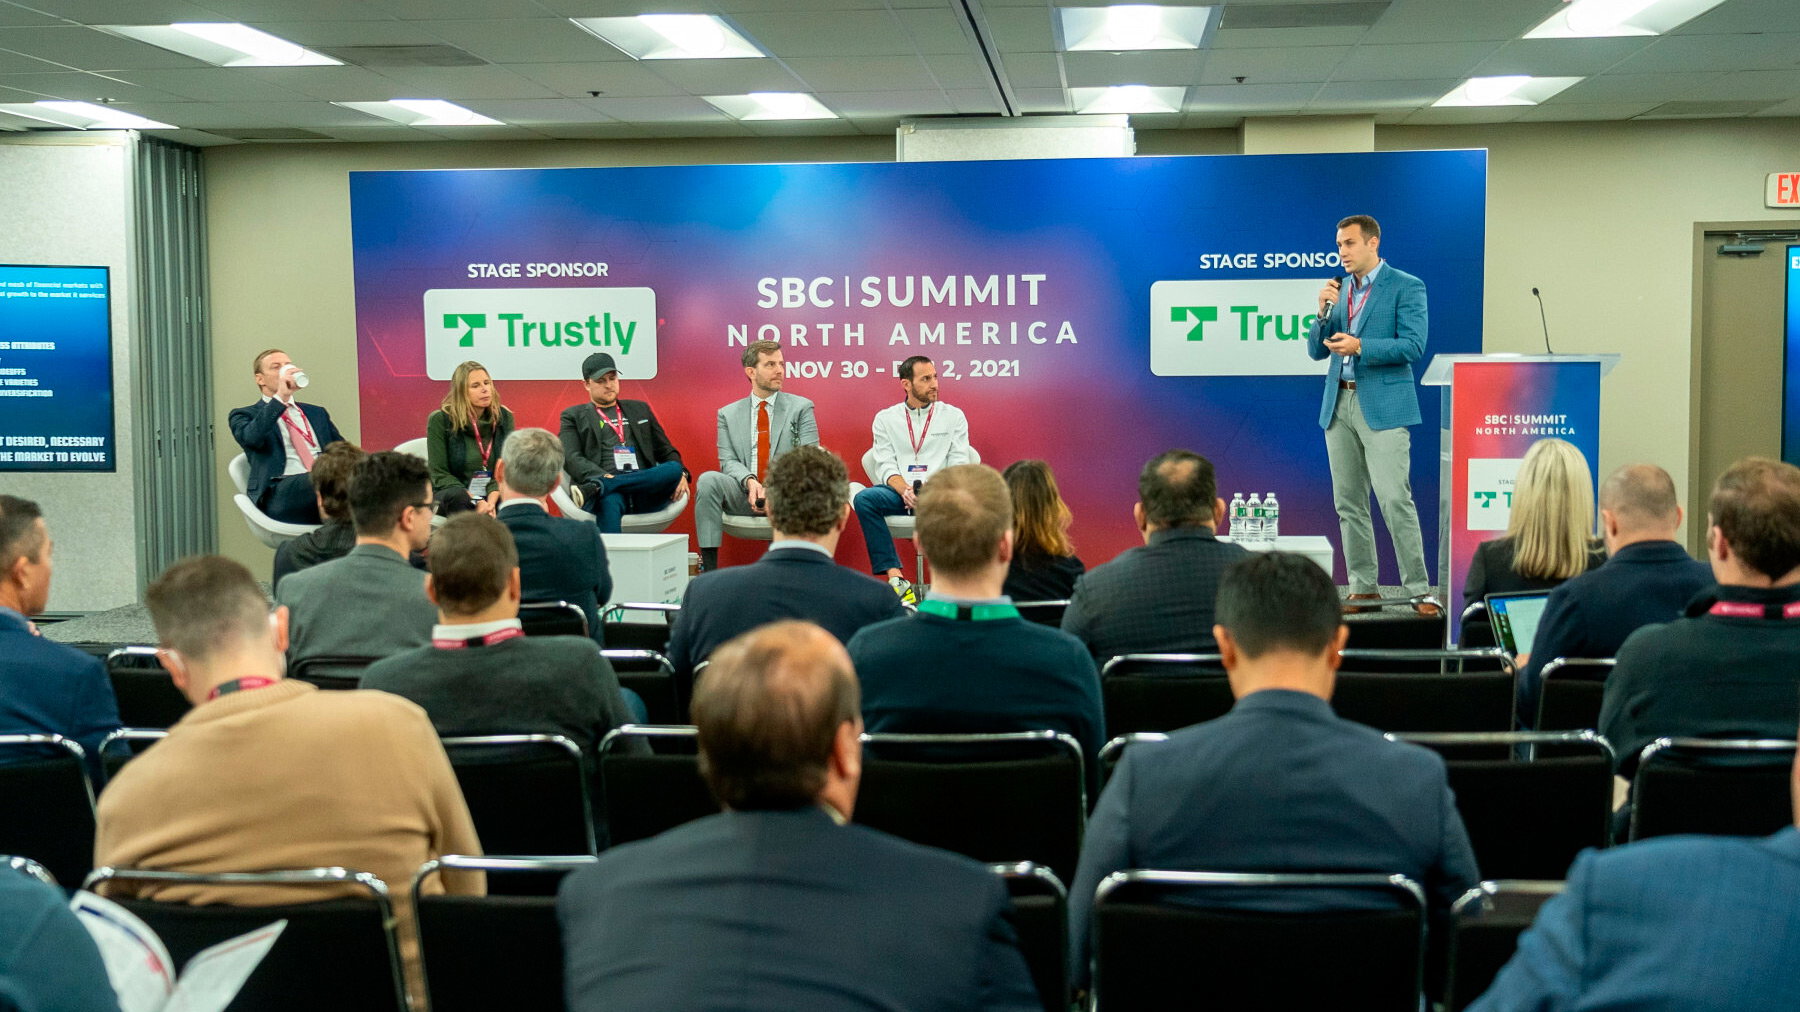 SBC Summit North America confirms five startups finalists for First